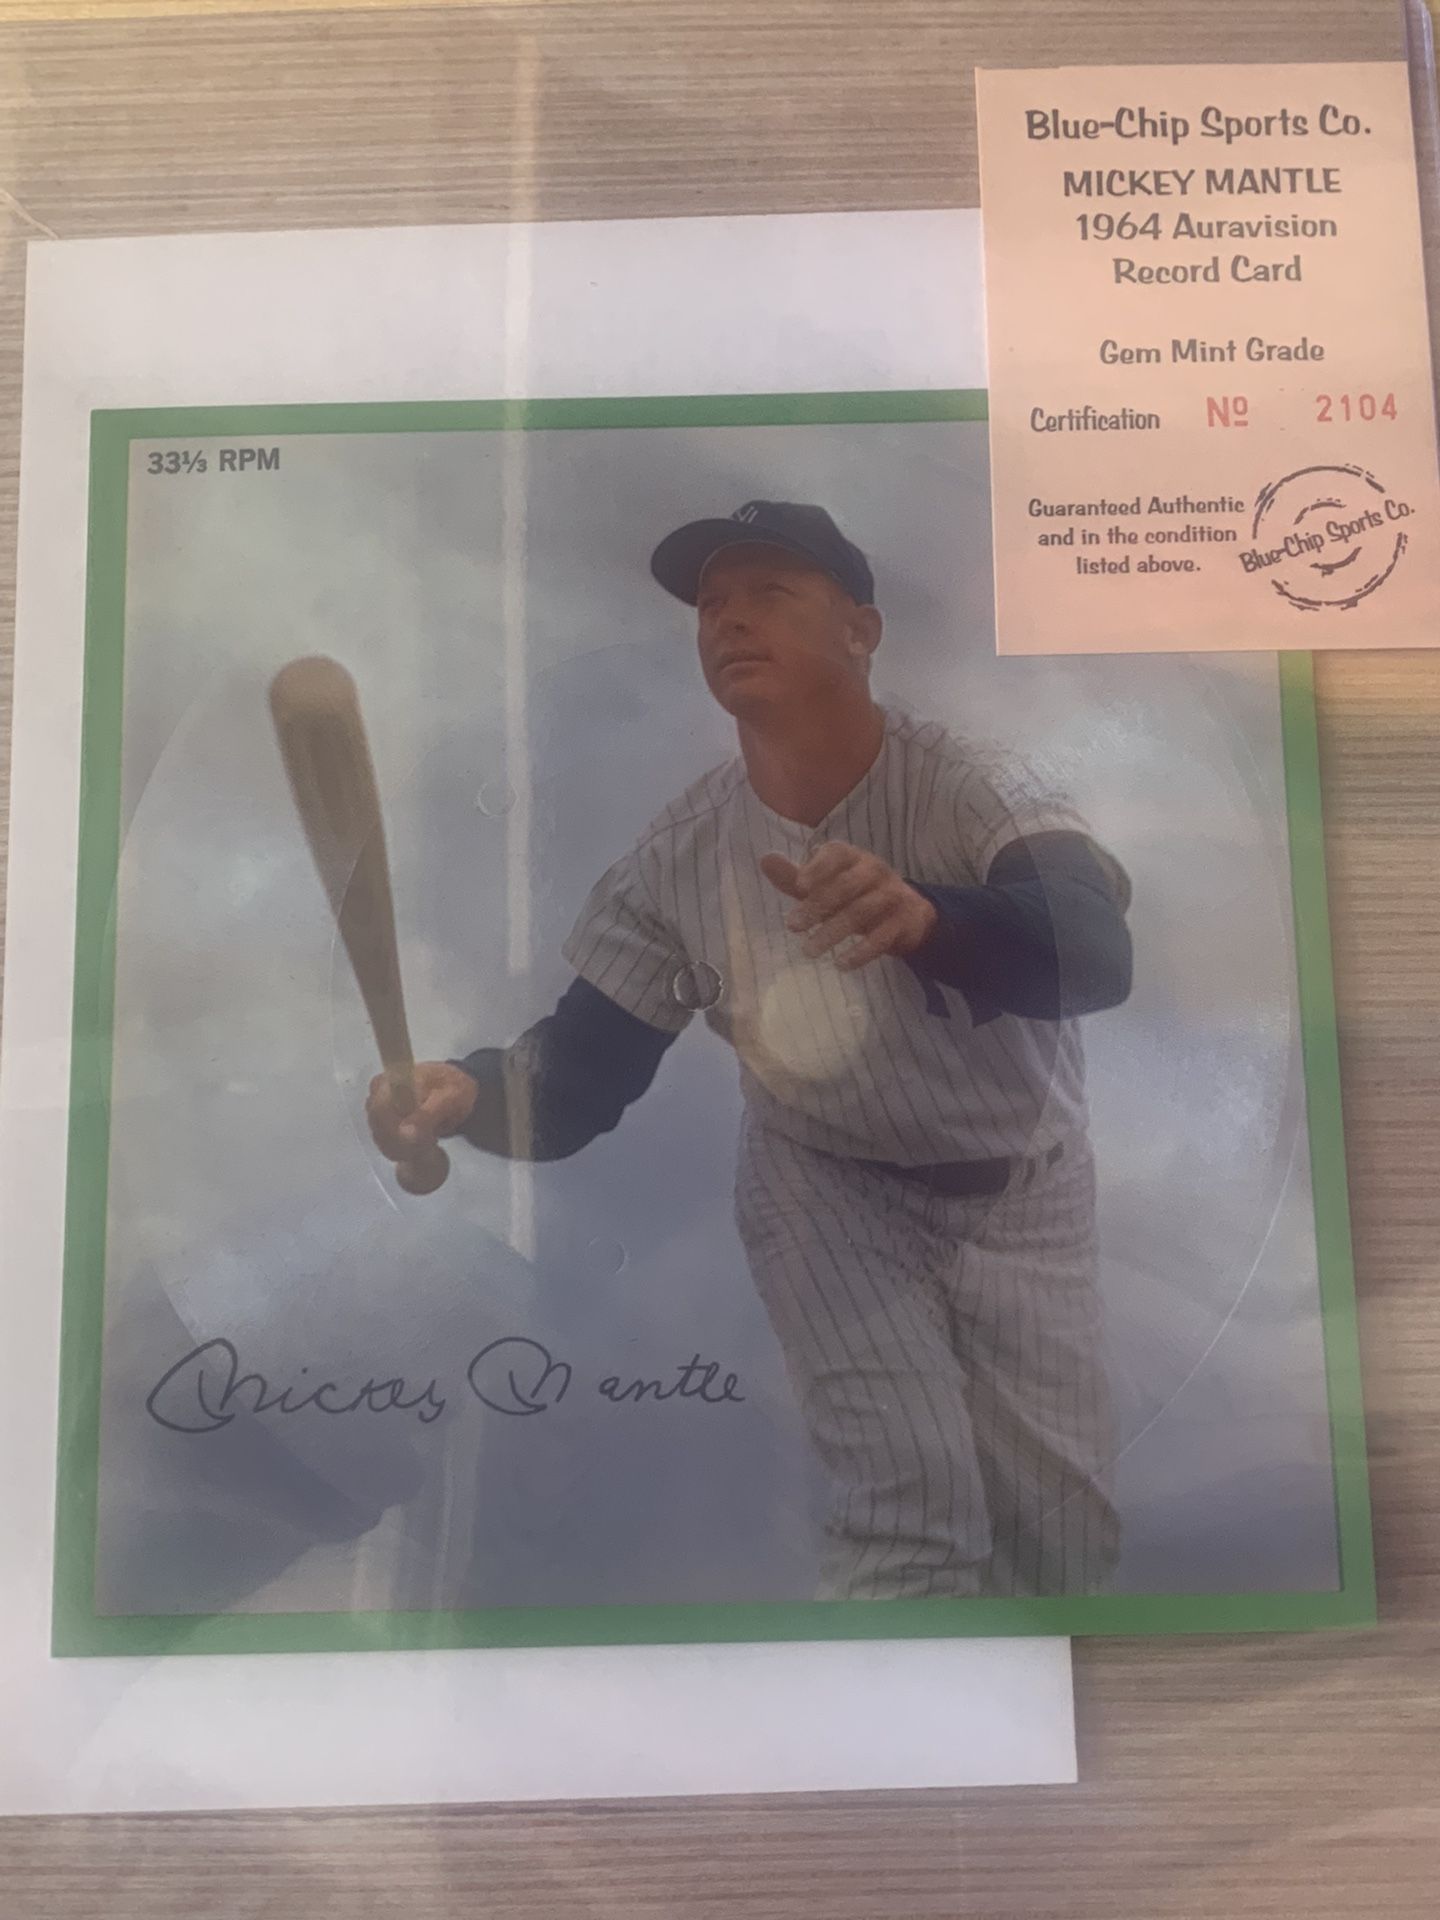 1964 Mickey Mantle Gem Mint Condition 